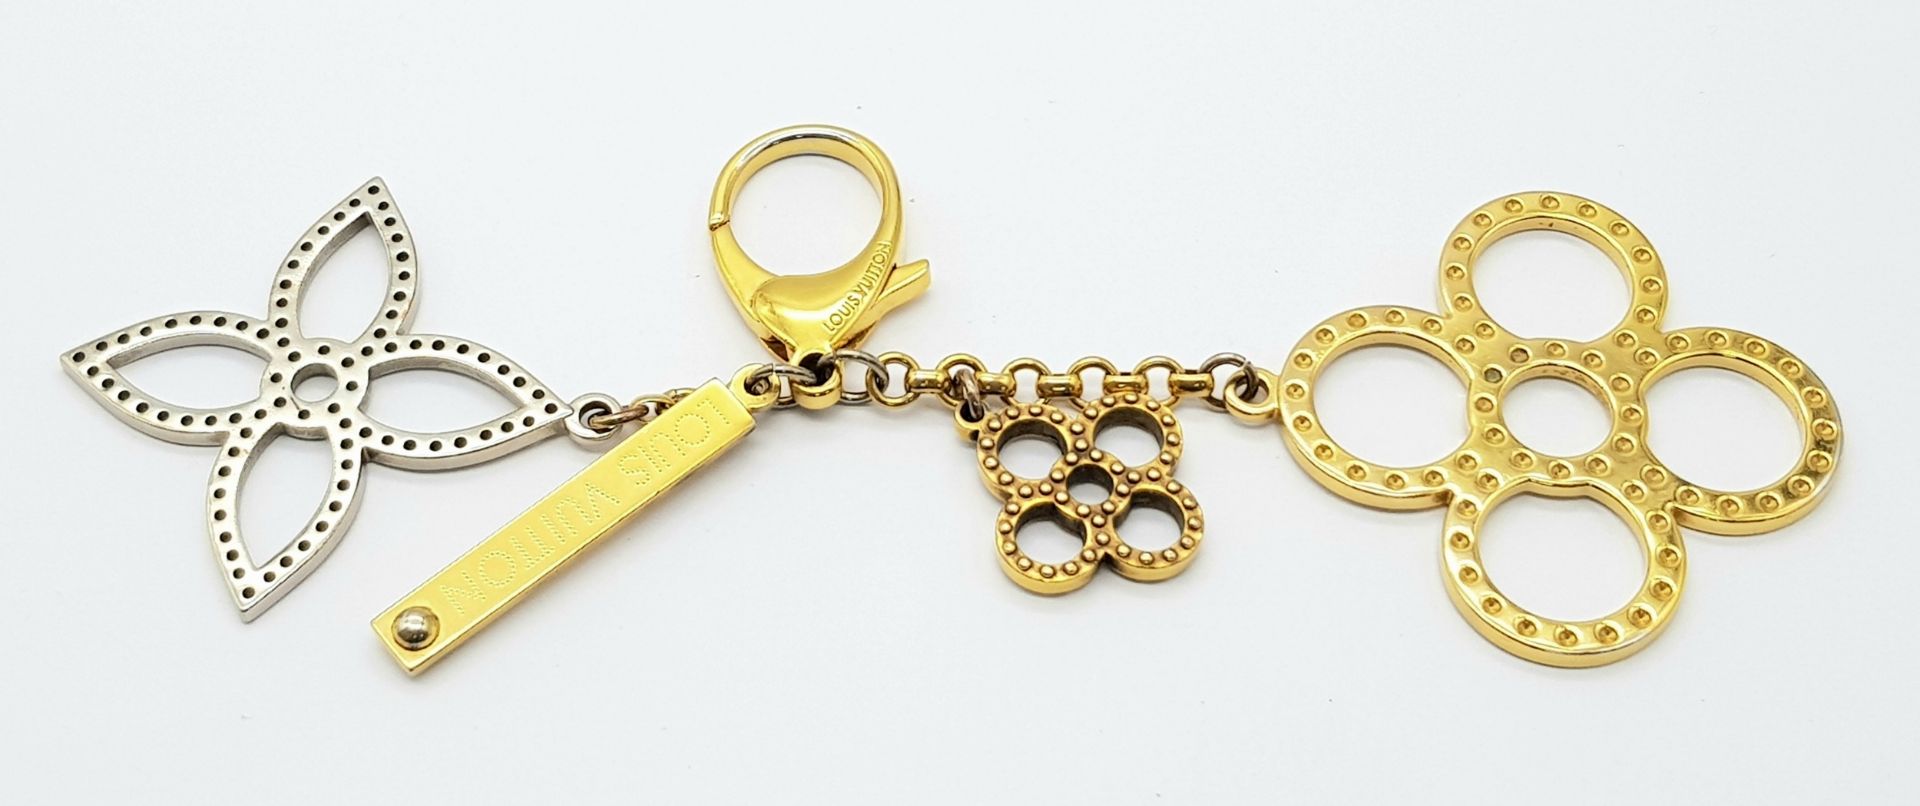 A Louis Vuitton Bijoux Sac Tapage Charm/Key Ring. Gold and silver-toned hardware with iconic LV - Bild 2 aus 7